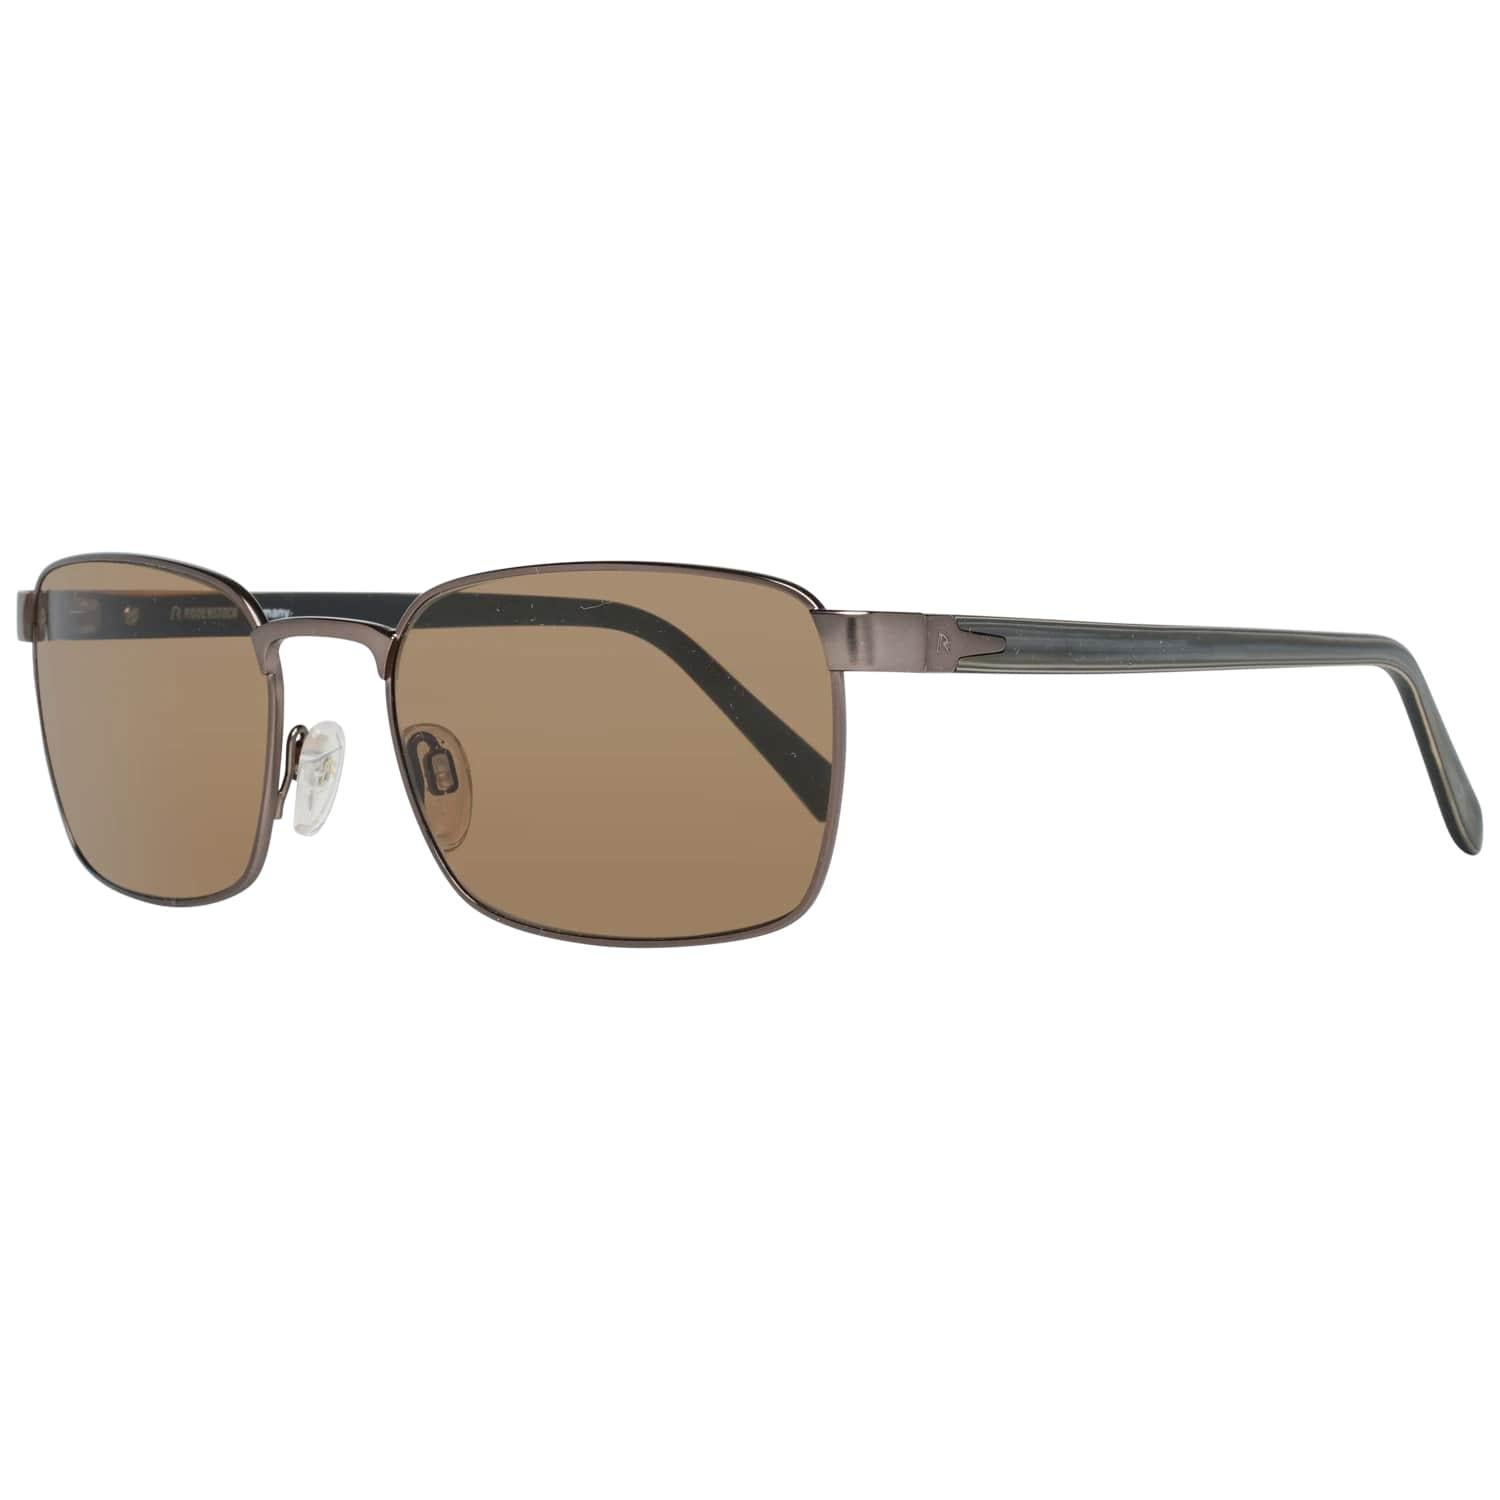 Details

MATERIAL: Metal

COLOR: Brown

MODEL: R1417 B 56

GENDER: Adult Unisex

COUNTRY OF MANUFACTURE: China

TYPE: Sunglasses

ORIGINAL CASE?: Yes

STYLE: Rectangle

OCCASION: Casual

FEATURES: Lightweight

LENS COLOR: Brown

LENS TECHNOLOGY: No